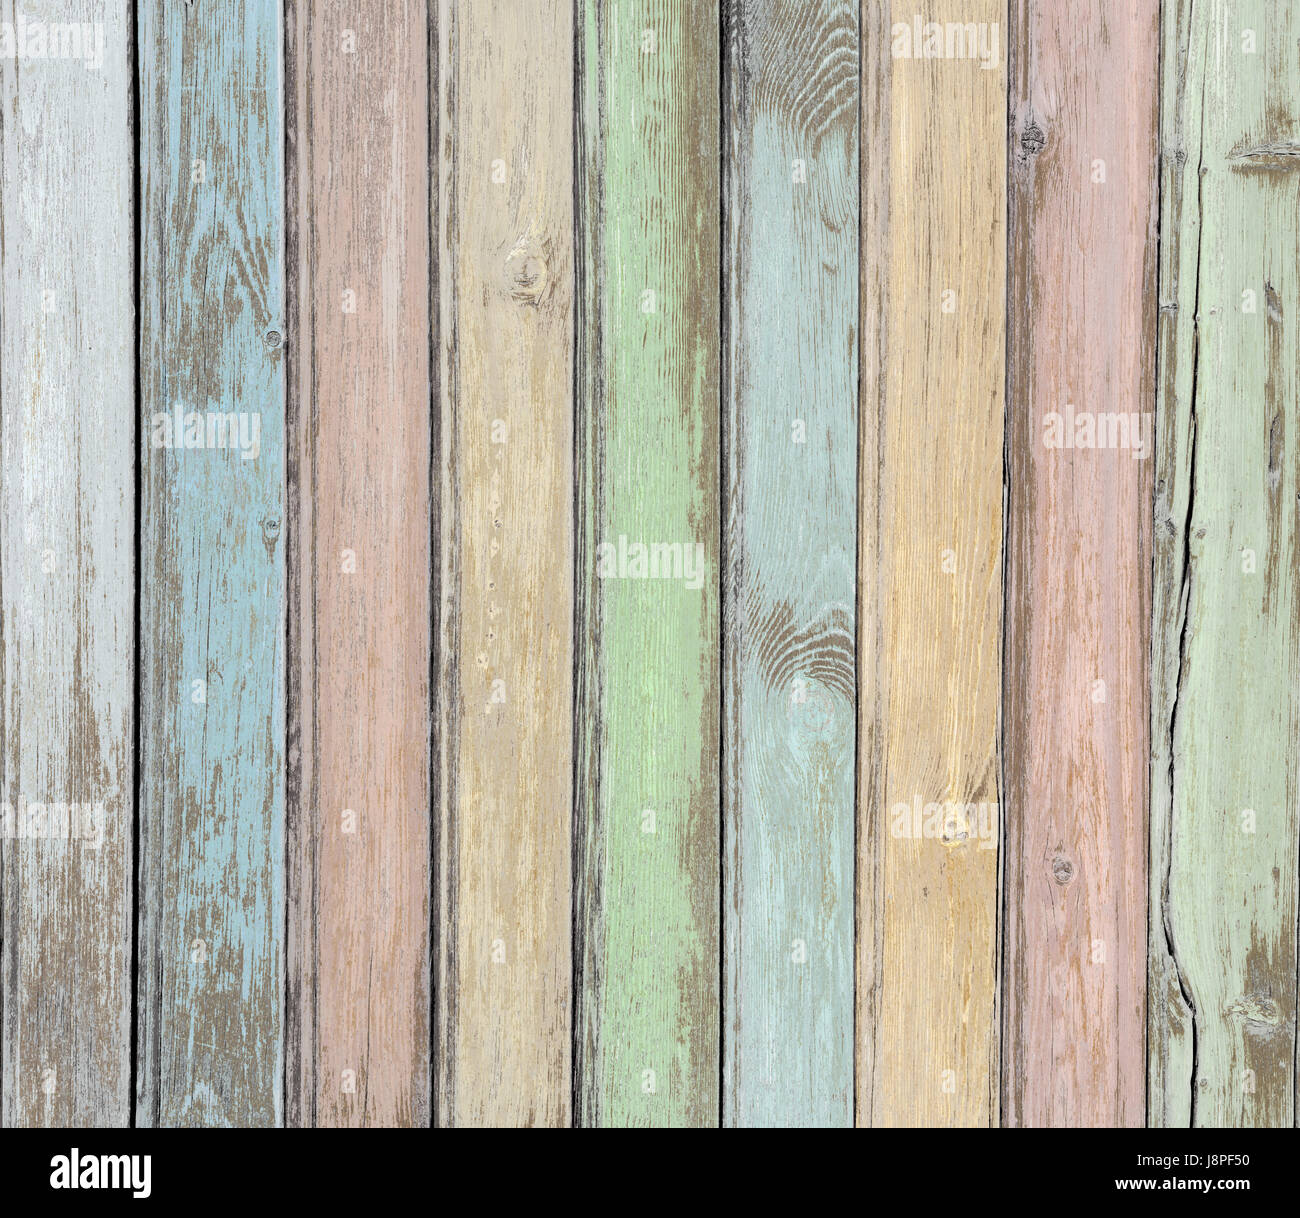 wood planks pastel colored background Stock Photo